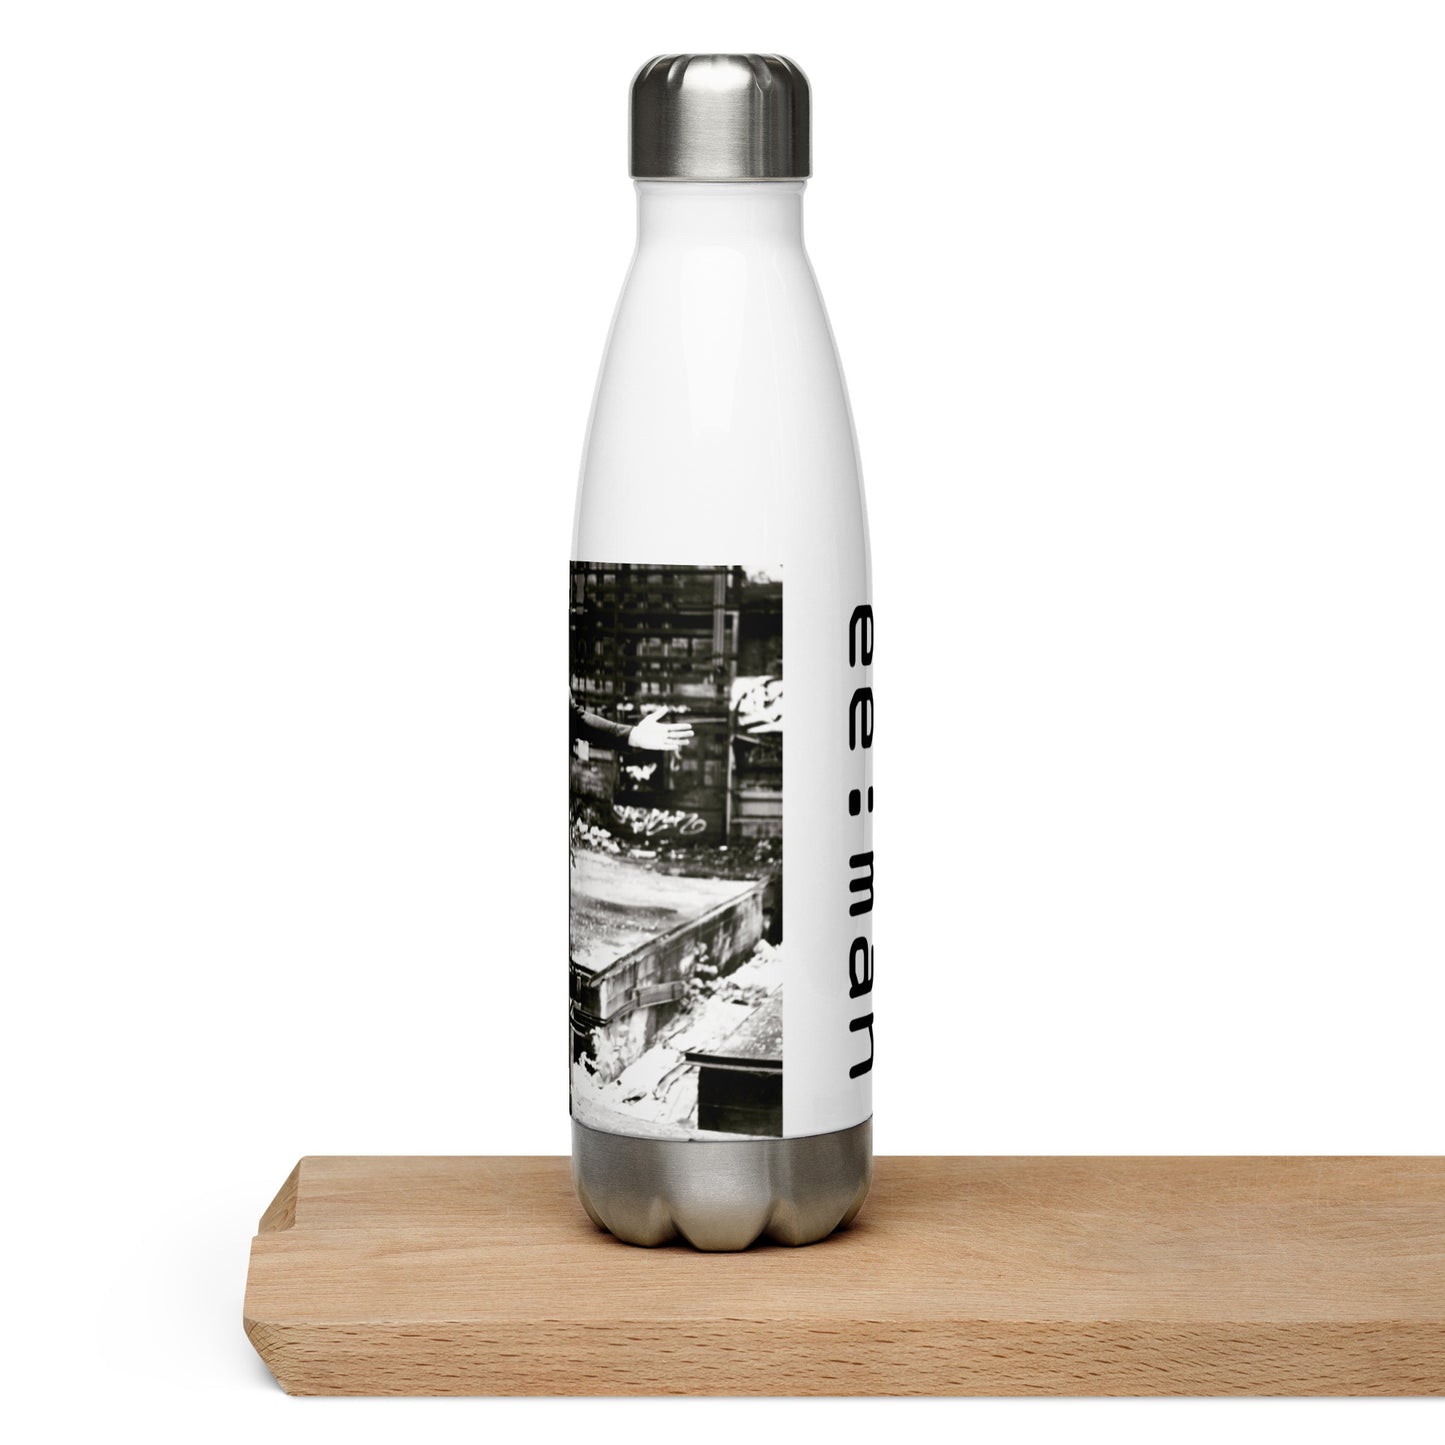 ee:man, official photo and logo, Stainless Steel Water Bottle